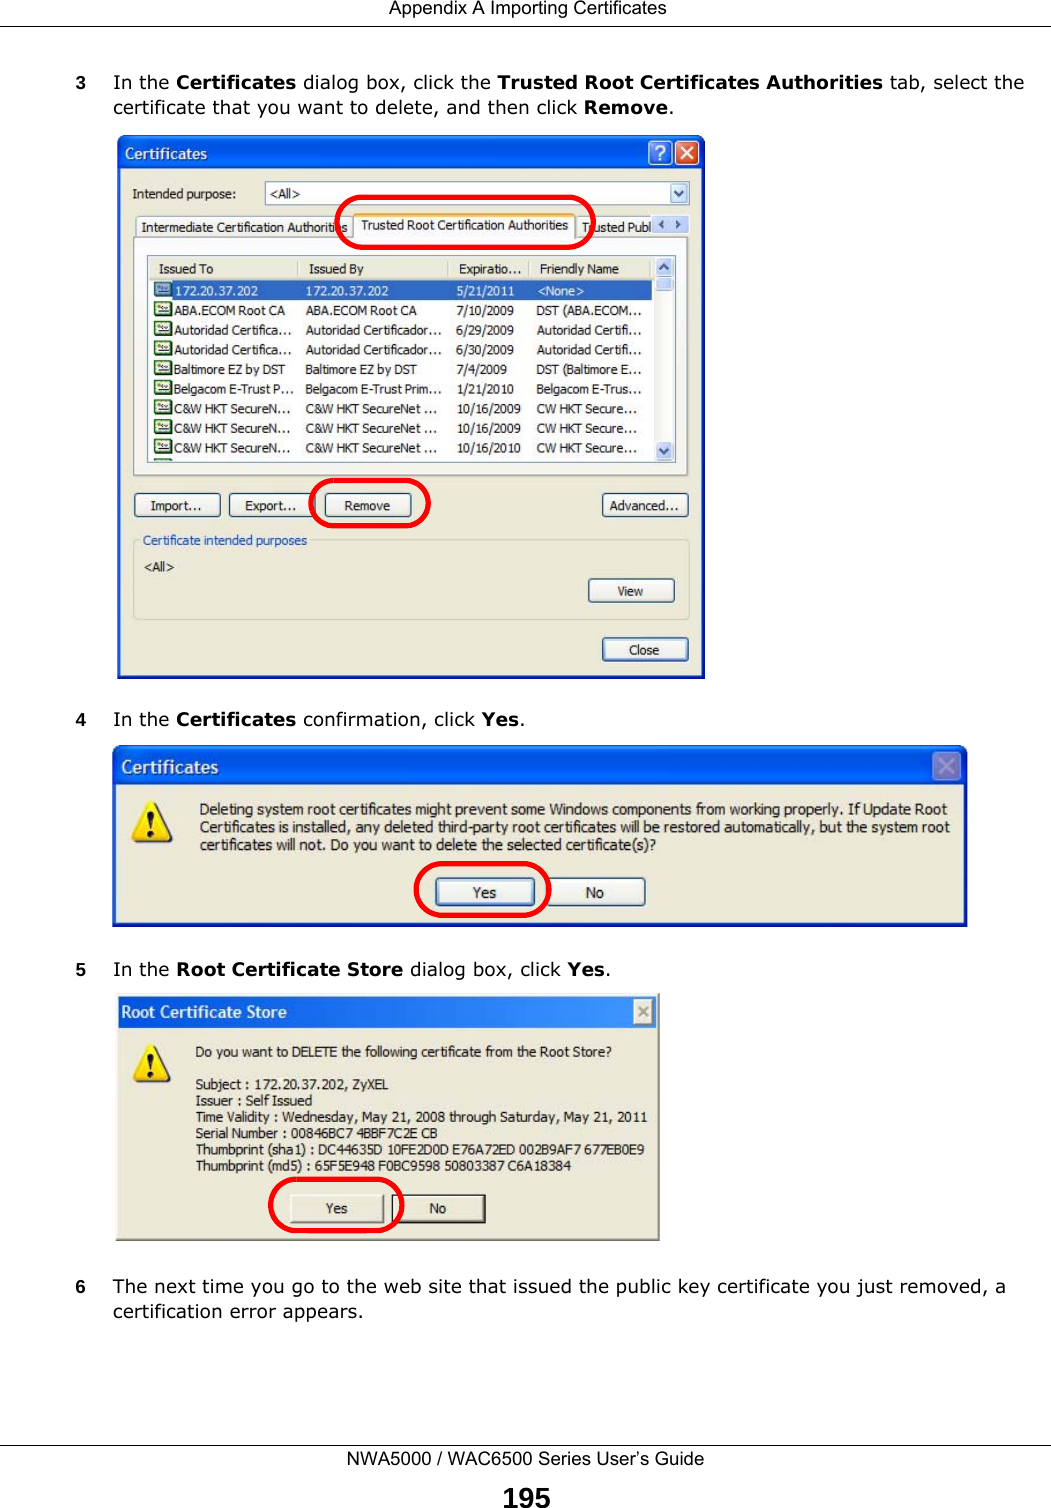  Appendix A Importing CertificatesNWA5000 / WAC6500 Series User’s Guide1953In the Certificates dialog box, click the Trusted Root Certificates Authorities tab, select the certificate that you want to delete, and then click Remove.4In the Certificates confirmation, click Yes.5In the Root Certificate Store dialog box, click Yes.6The next time you go to the web site that issued the public key certificate you just removed, a certification error appears.